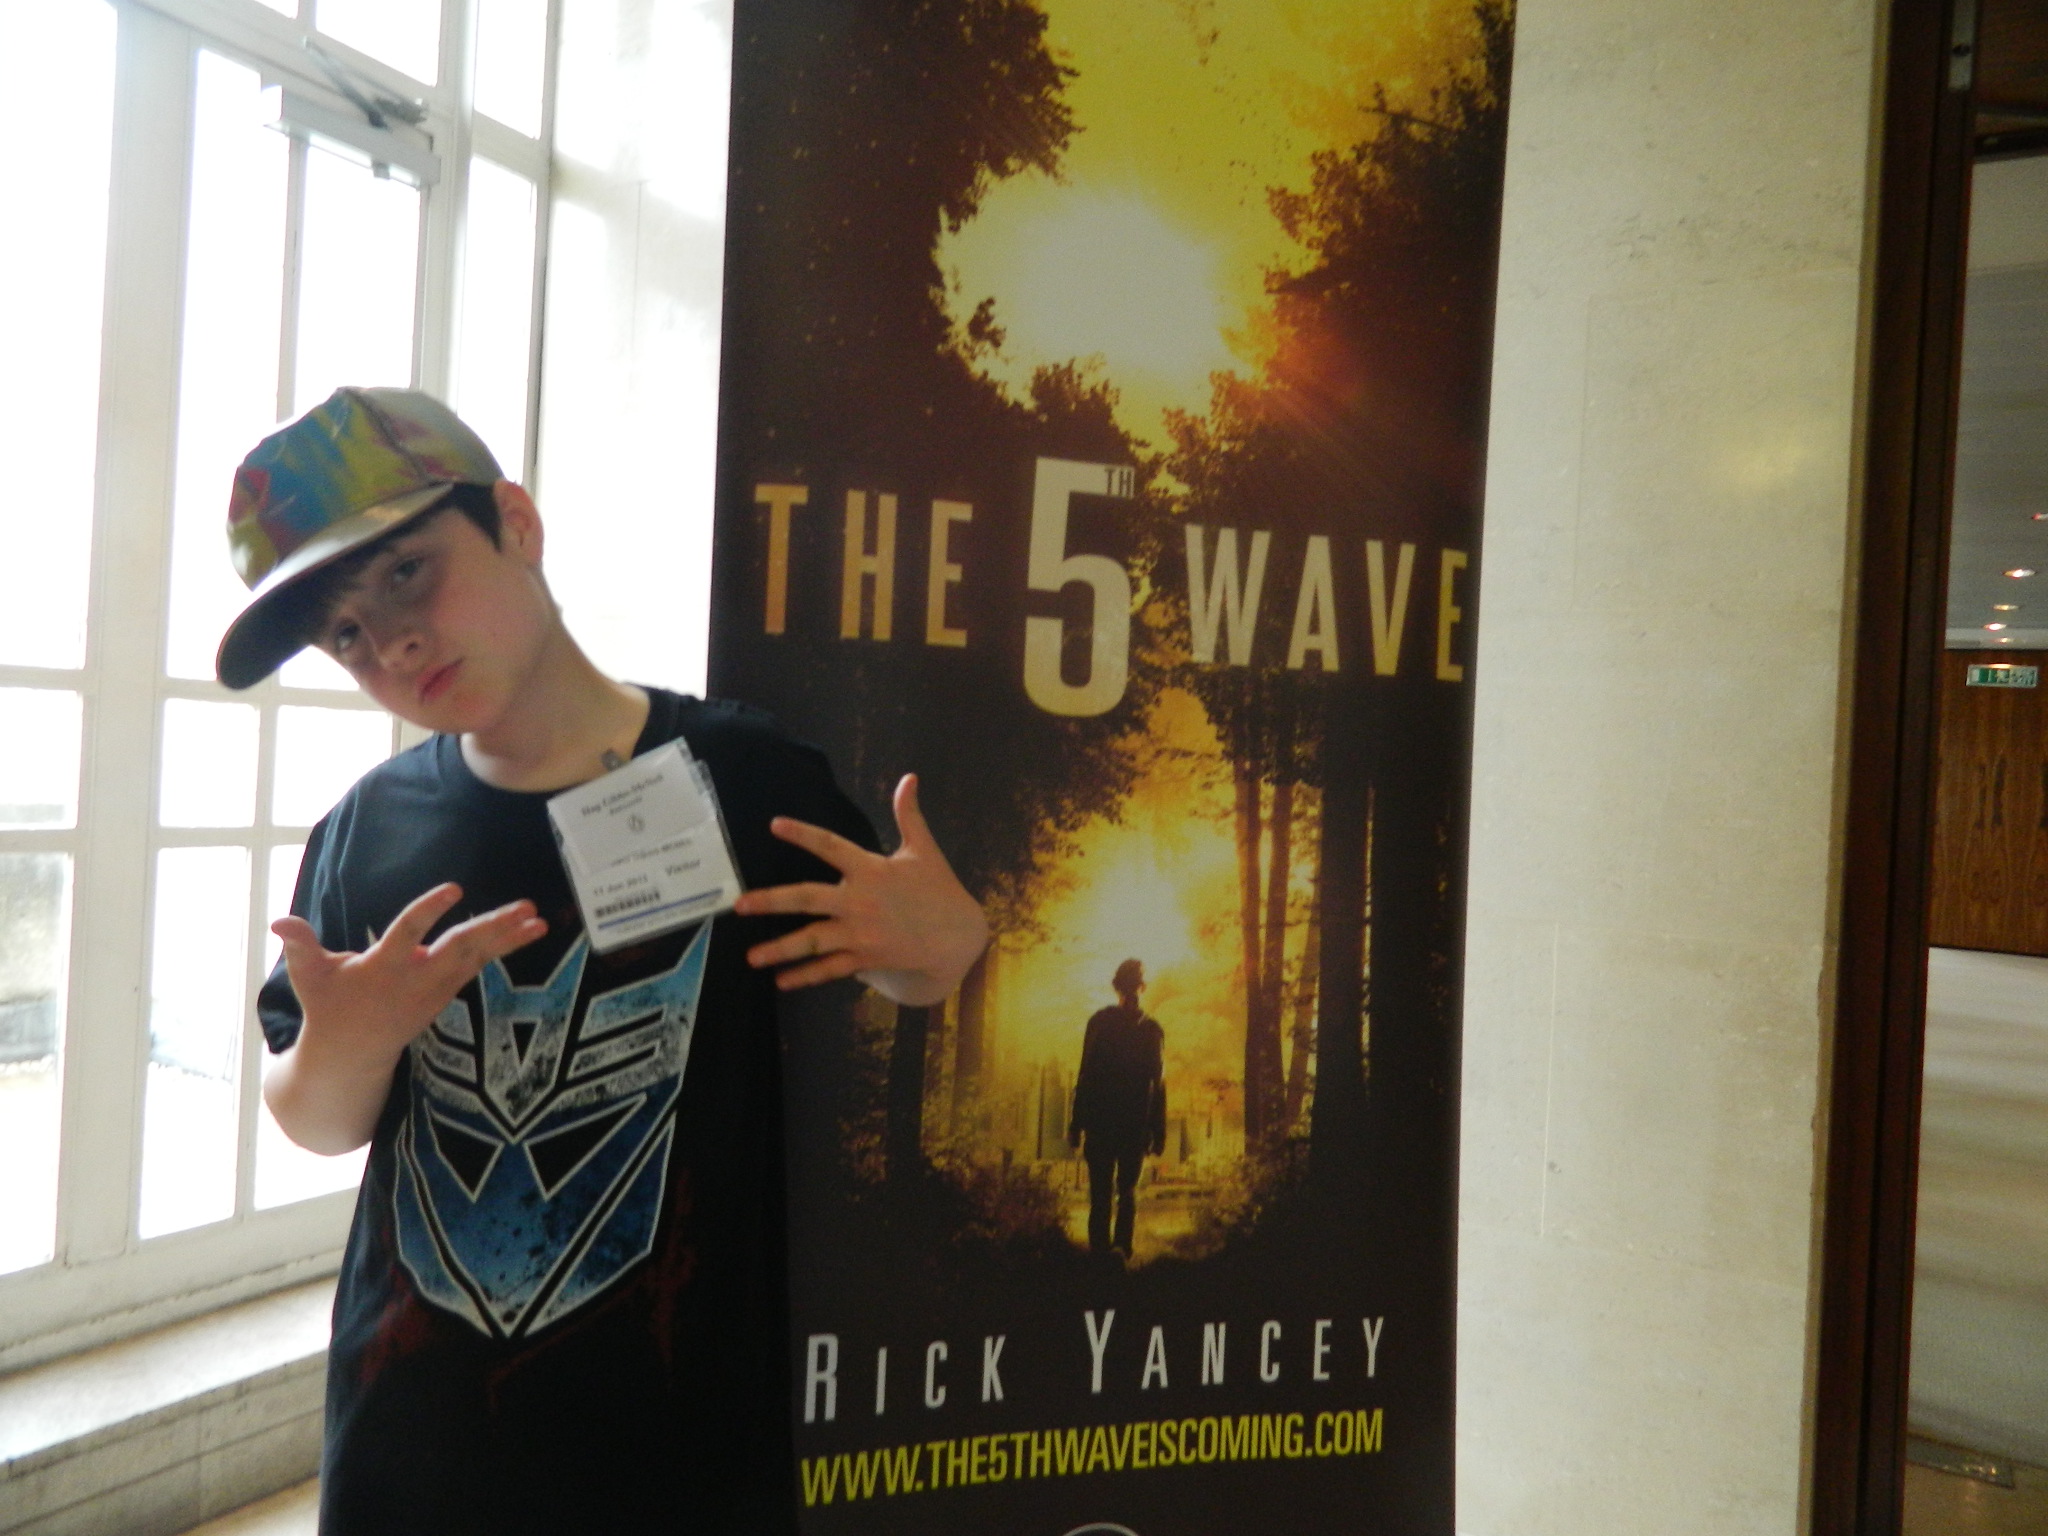 the 5th wave on dvd